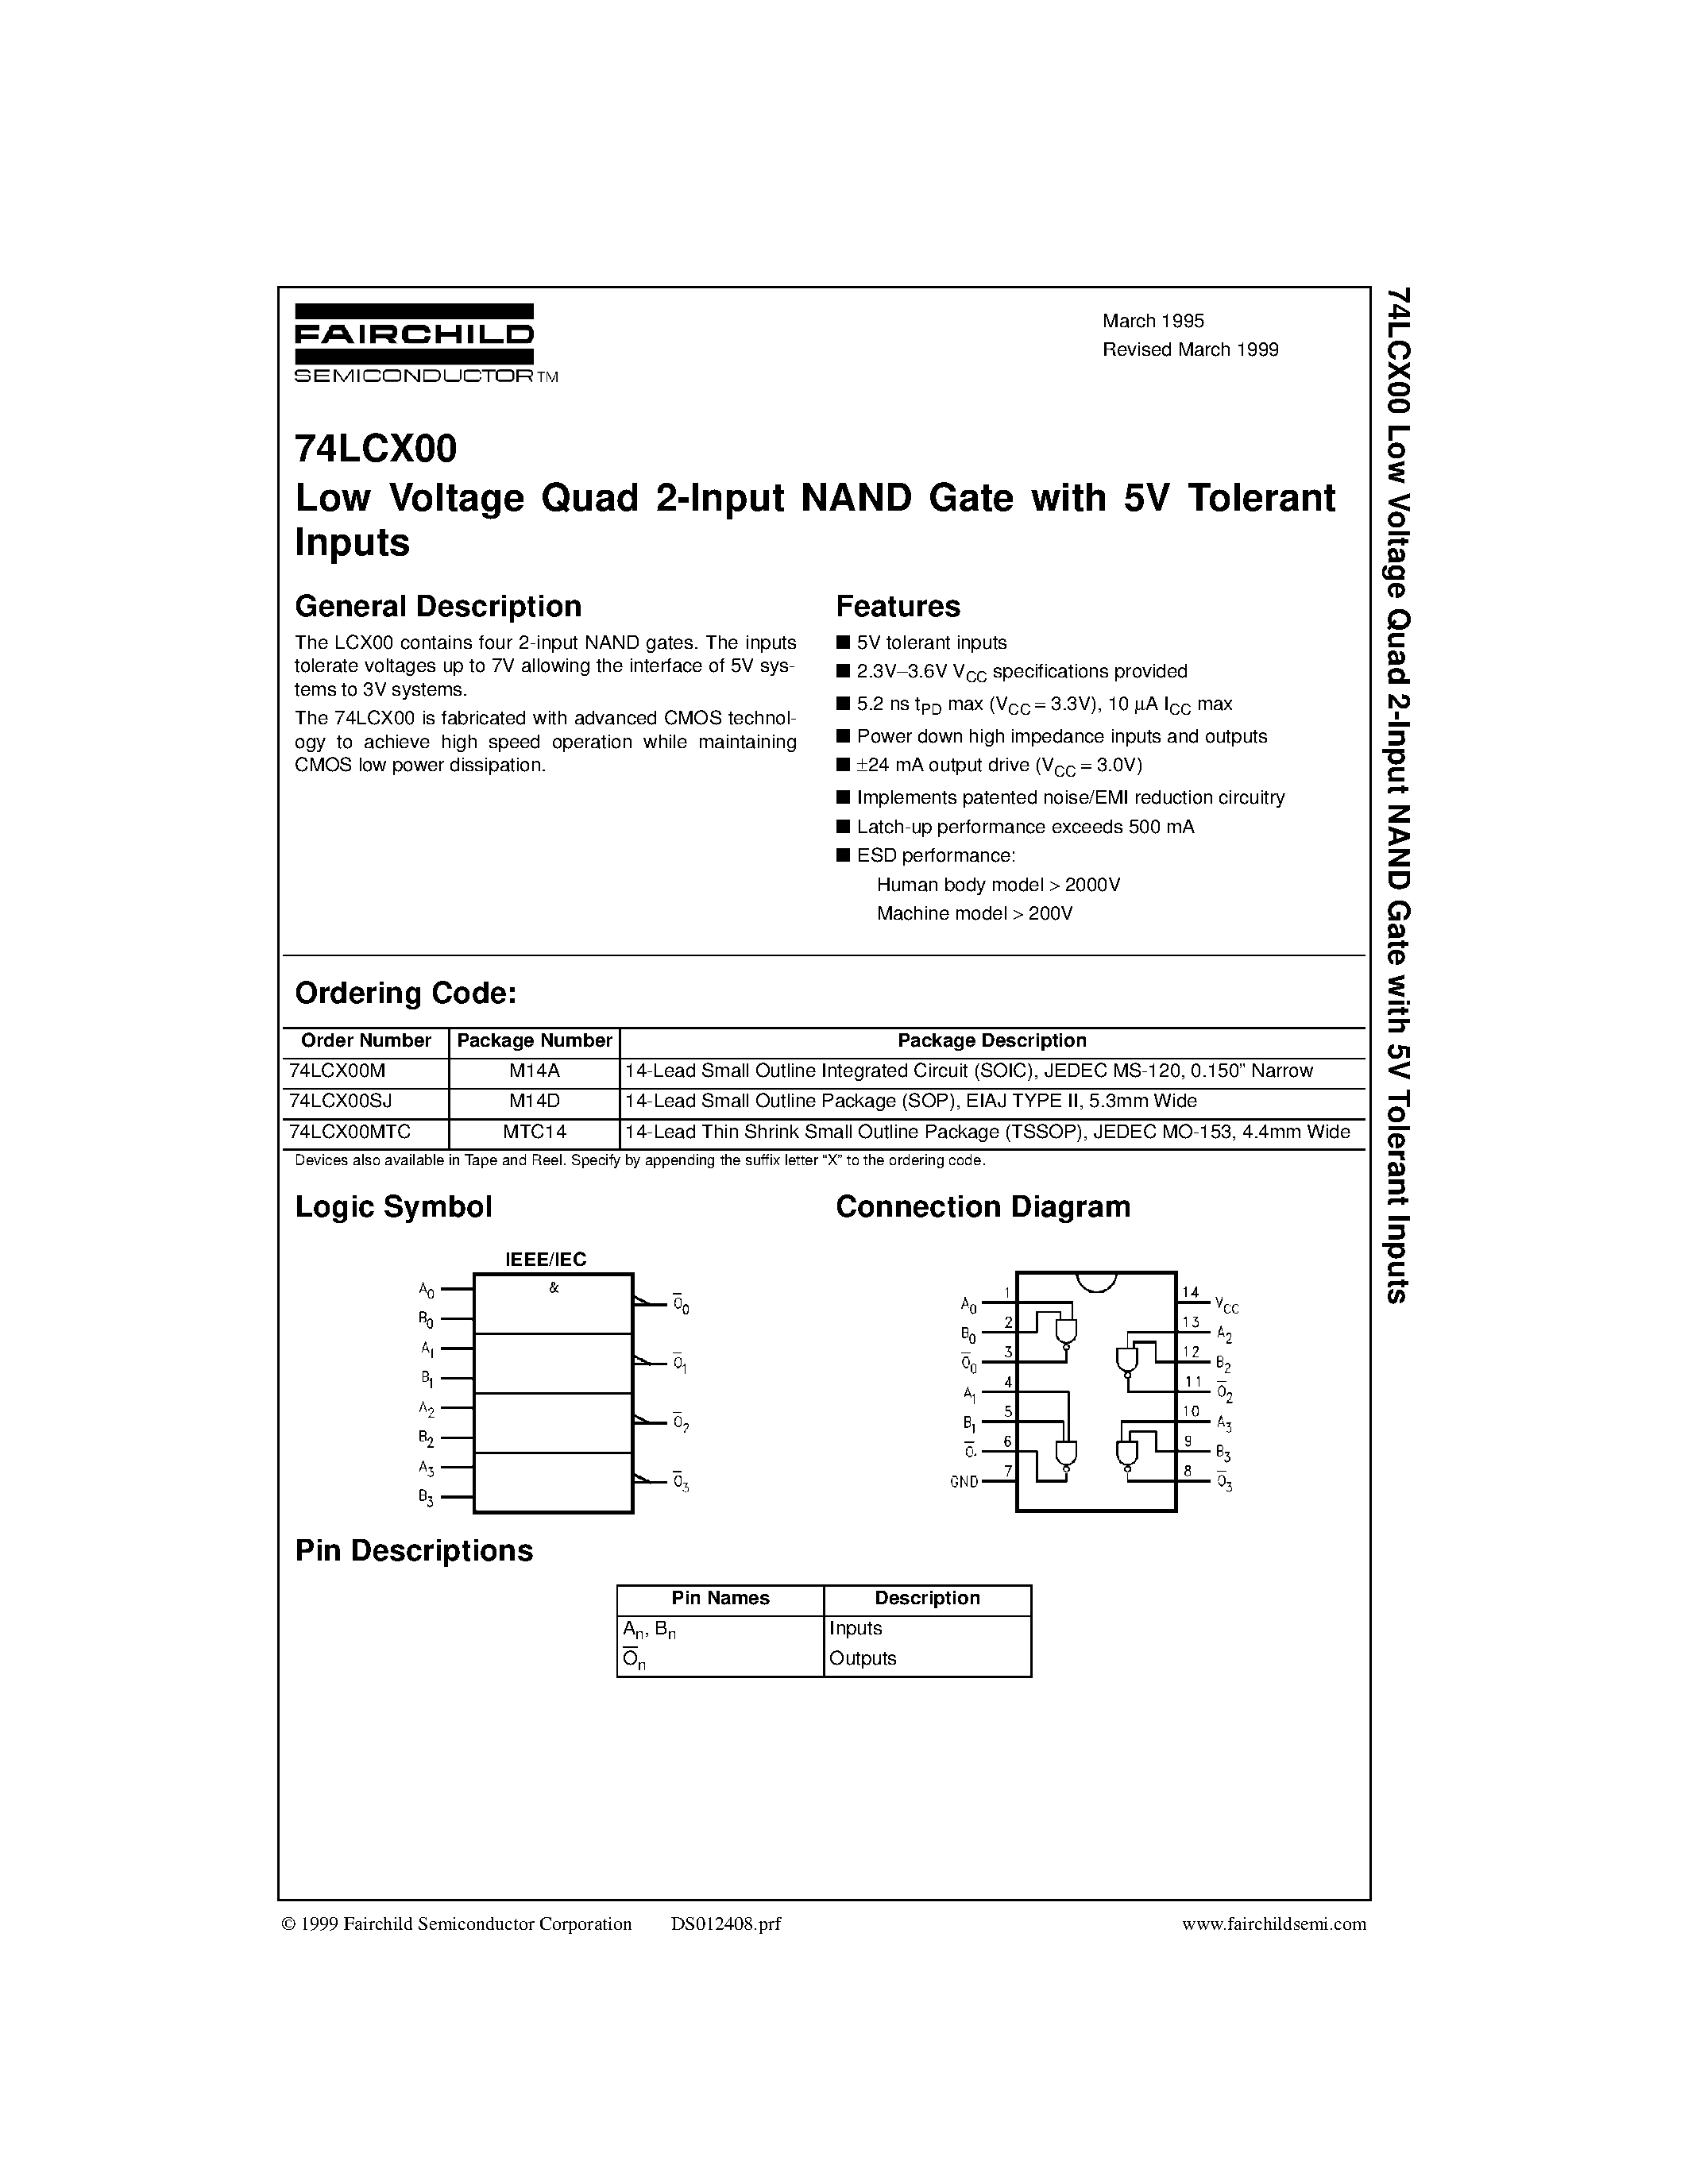 Datasheet 74LCX00MTCX - Low Voltage Quad 2-Input NAND Gate with 5V Tolerant Inputs page 1